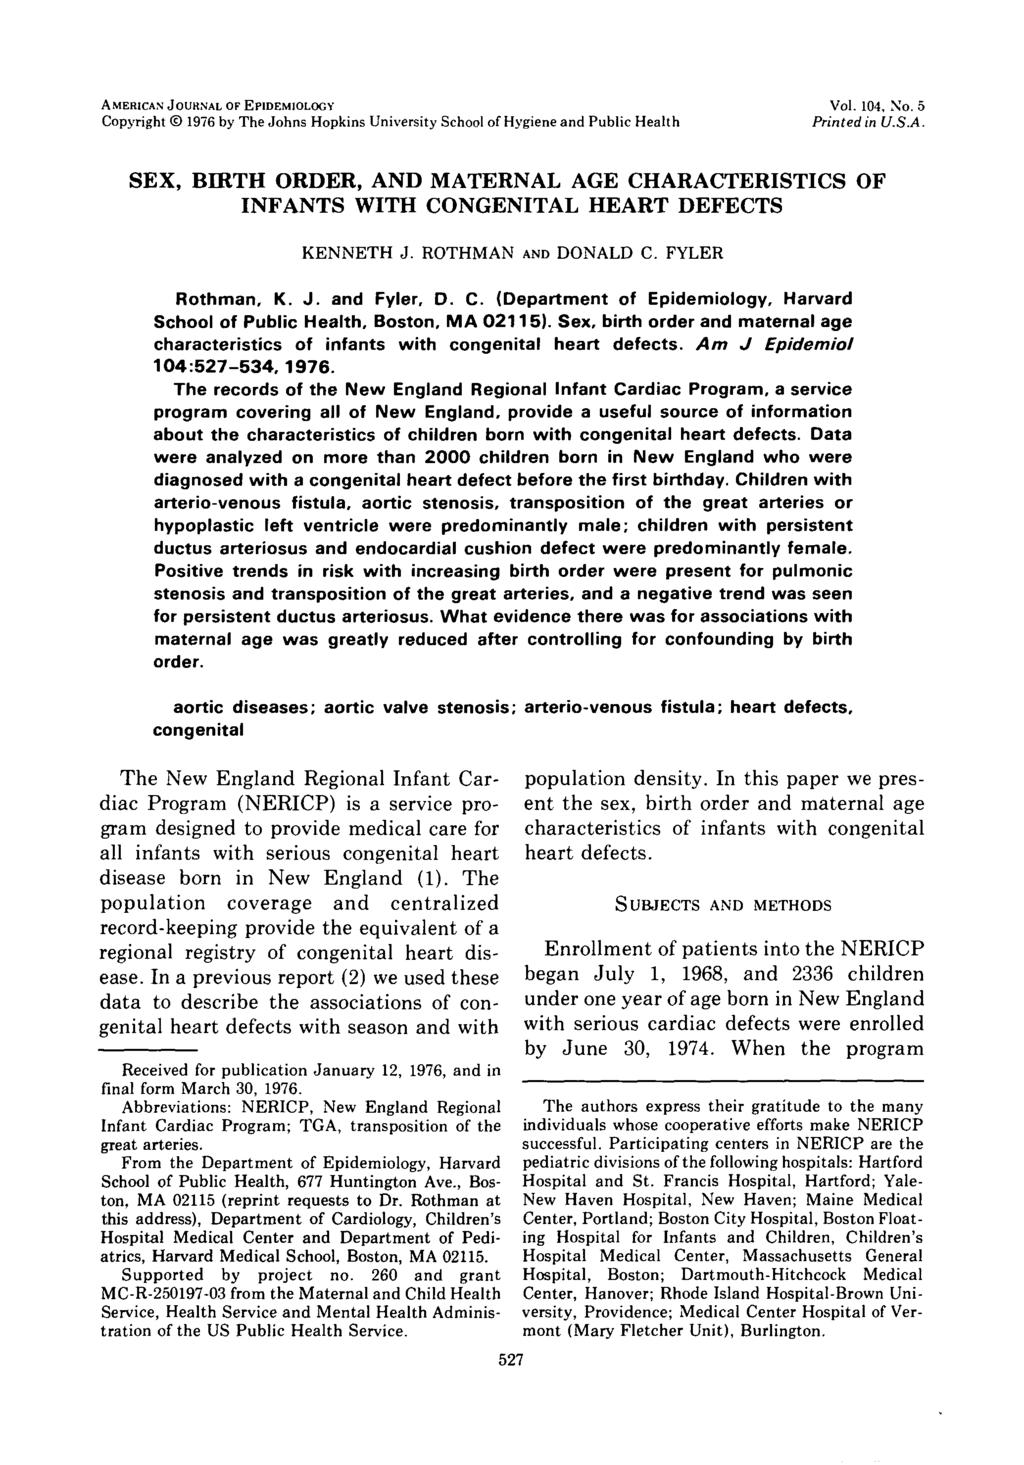 AMERICAN JOURNAL OF EPIDEMIOLOGY Copyright 1 by The Johns Hopkins University School of Hygiene and Public Health Vol., Xo. Printed in U.S.A. SEX, BIRTH ORDER, AND MATERNAL AGE CHARACTERISTICS OF INFANTS WITH CONGENITAL HEART DEFECTS KENNETH J.